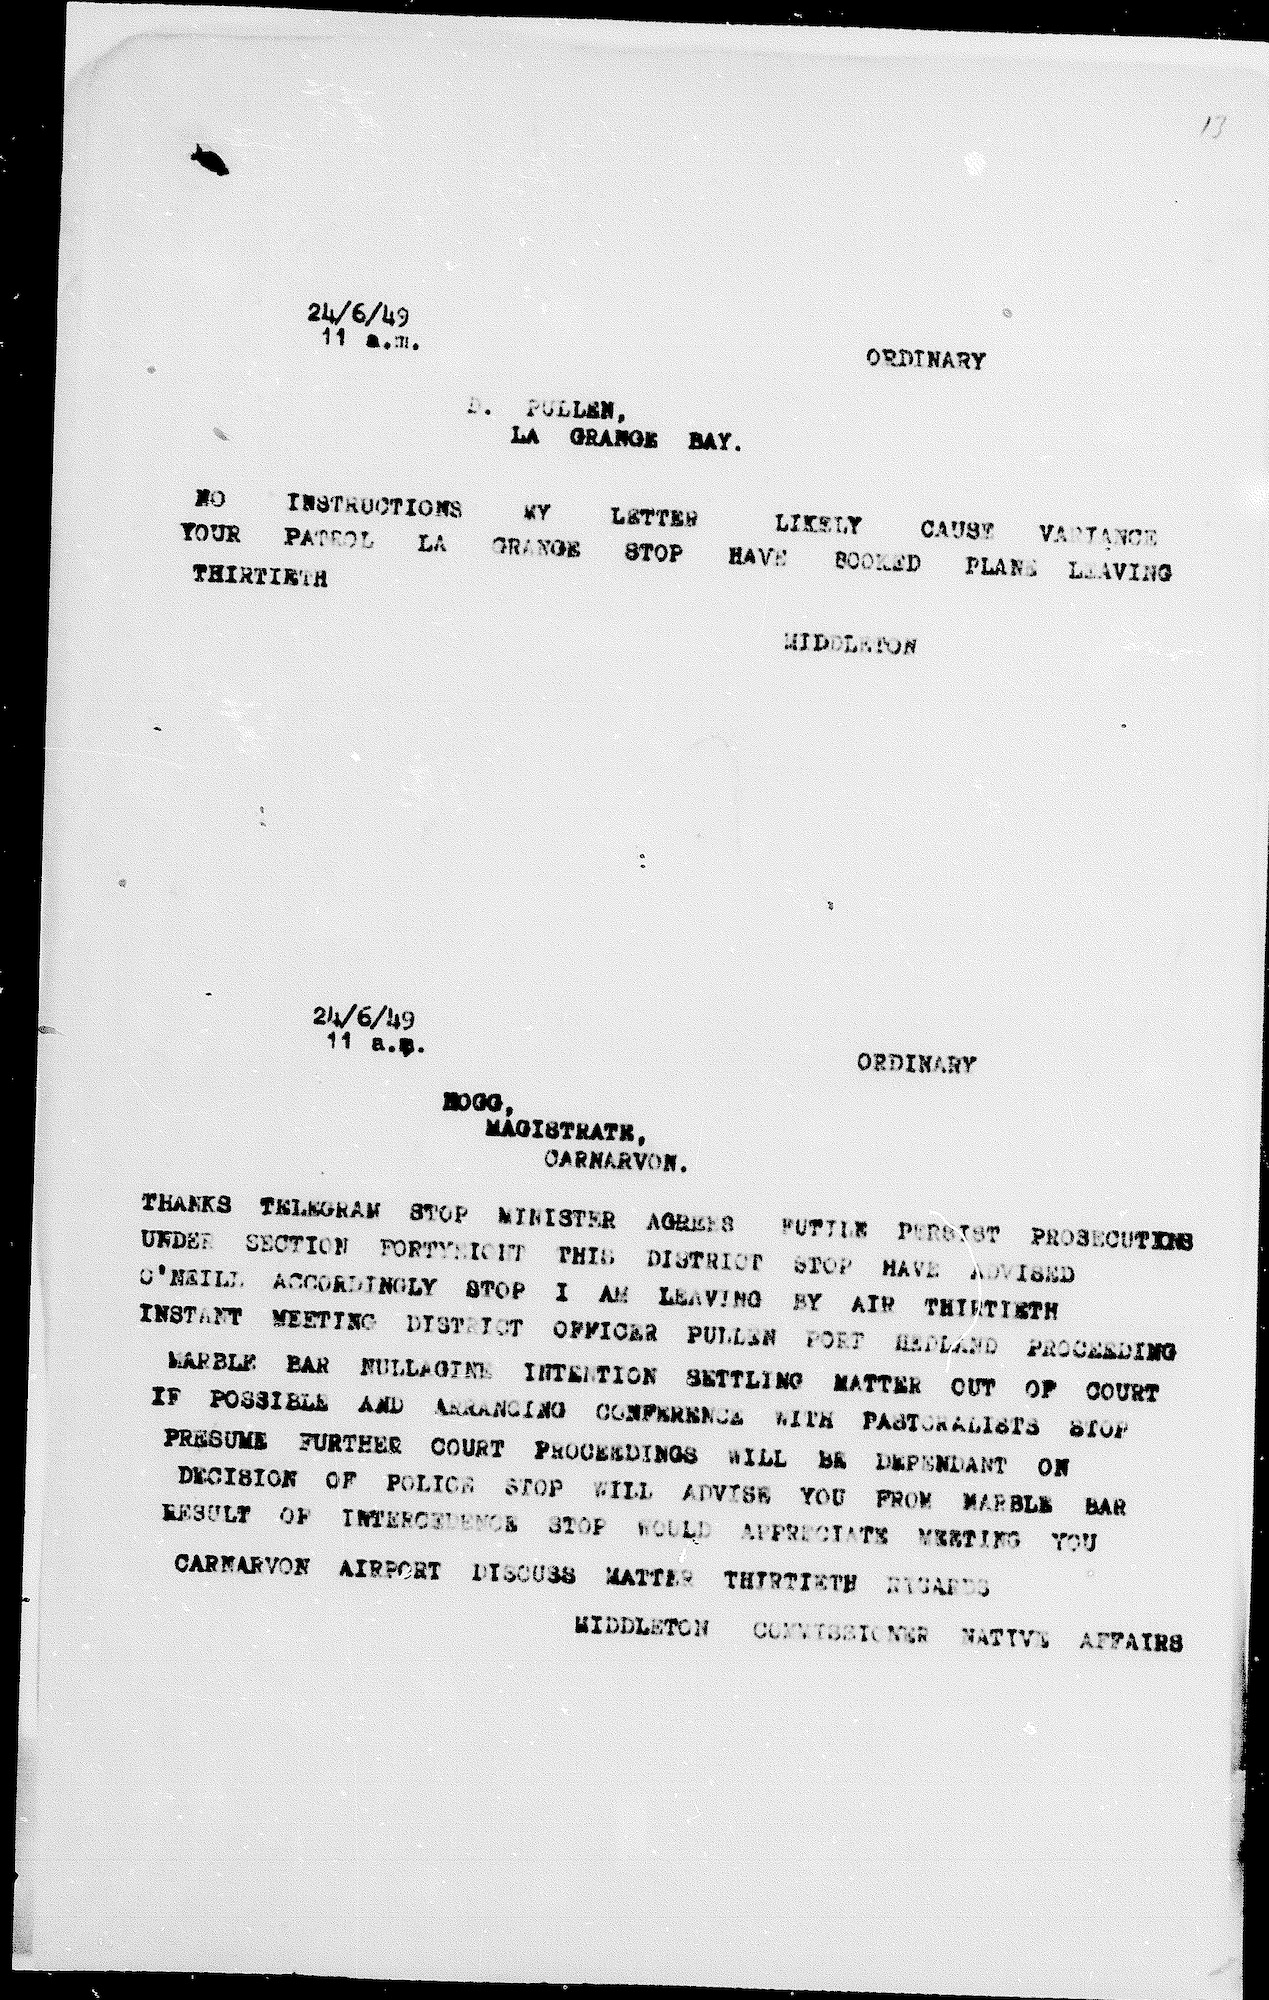 Stan Middleton to Magistrate Keith Hogg, 24 June 1949